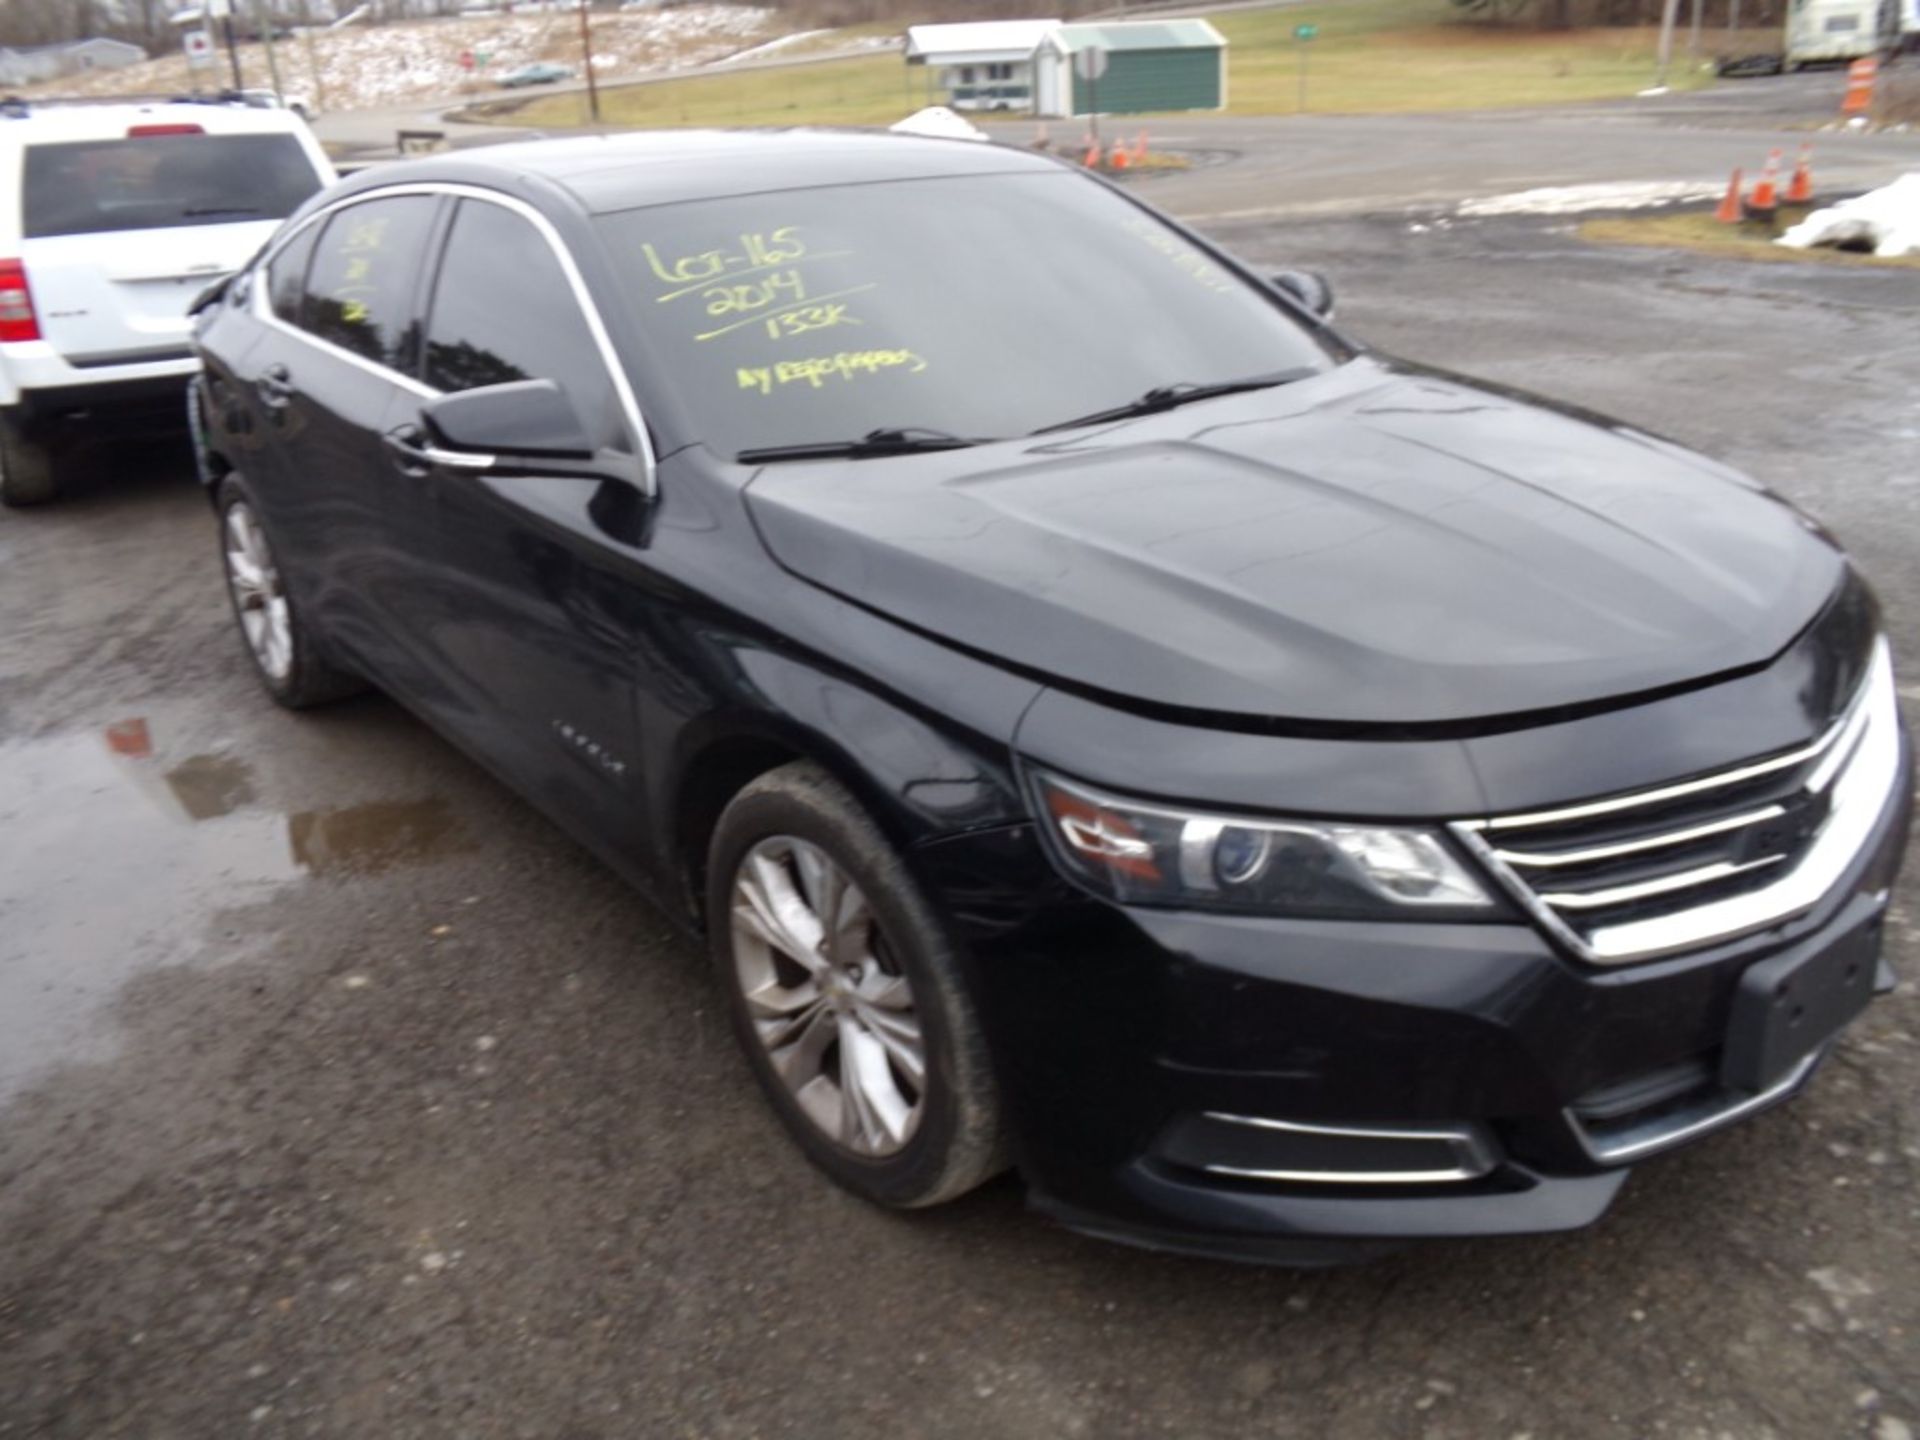 2014 Chevrolet Impala LT, Leather, Windows Are Tinted, Includig Front Windshield, Black, 133,313 - Image 6 of 6